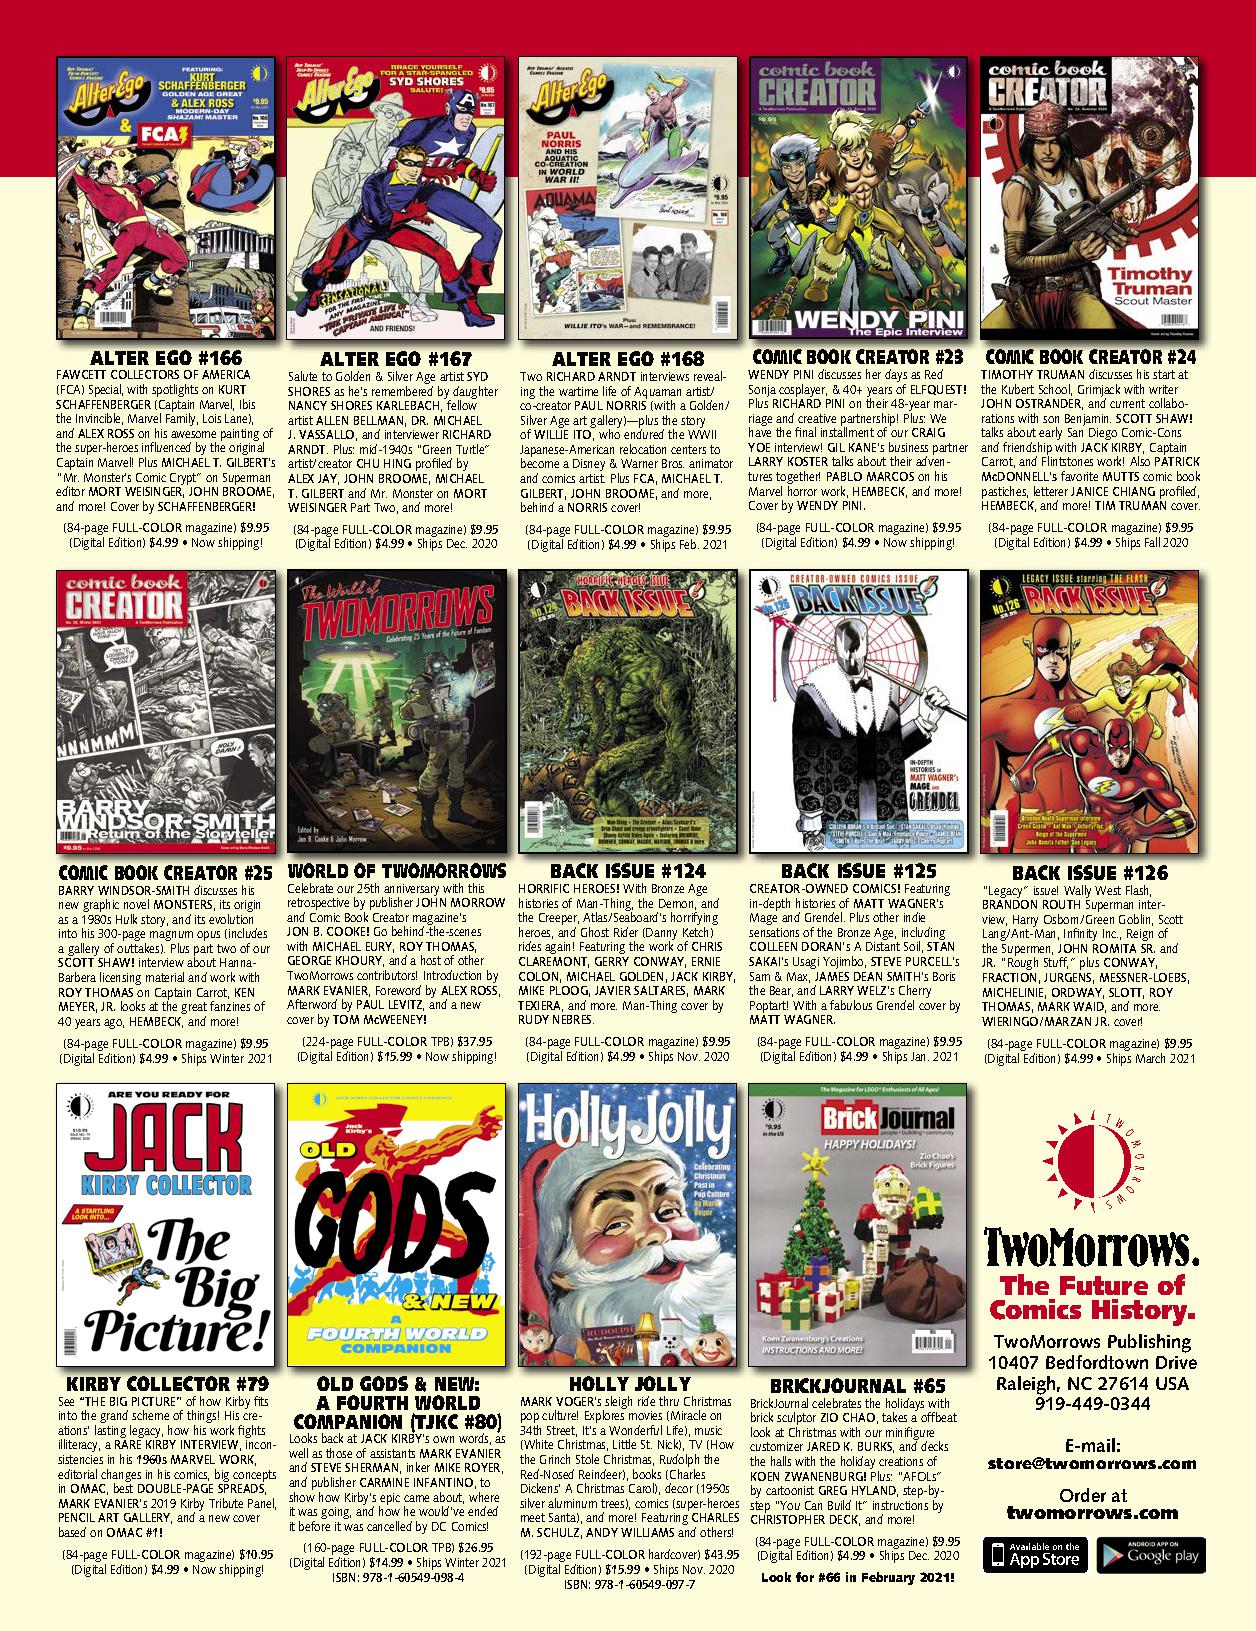 Read online Back Issue comic -  Issue #123 - 83